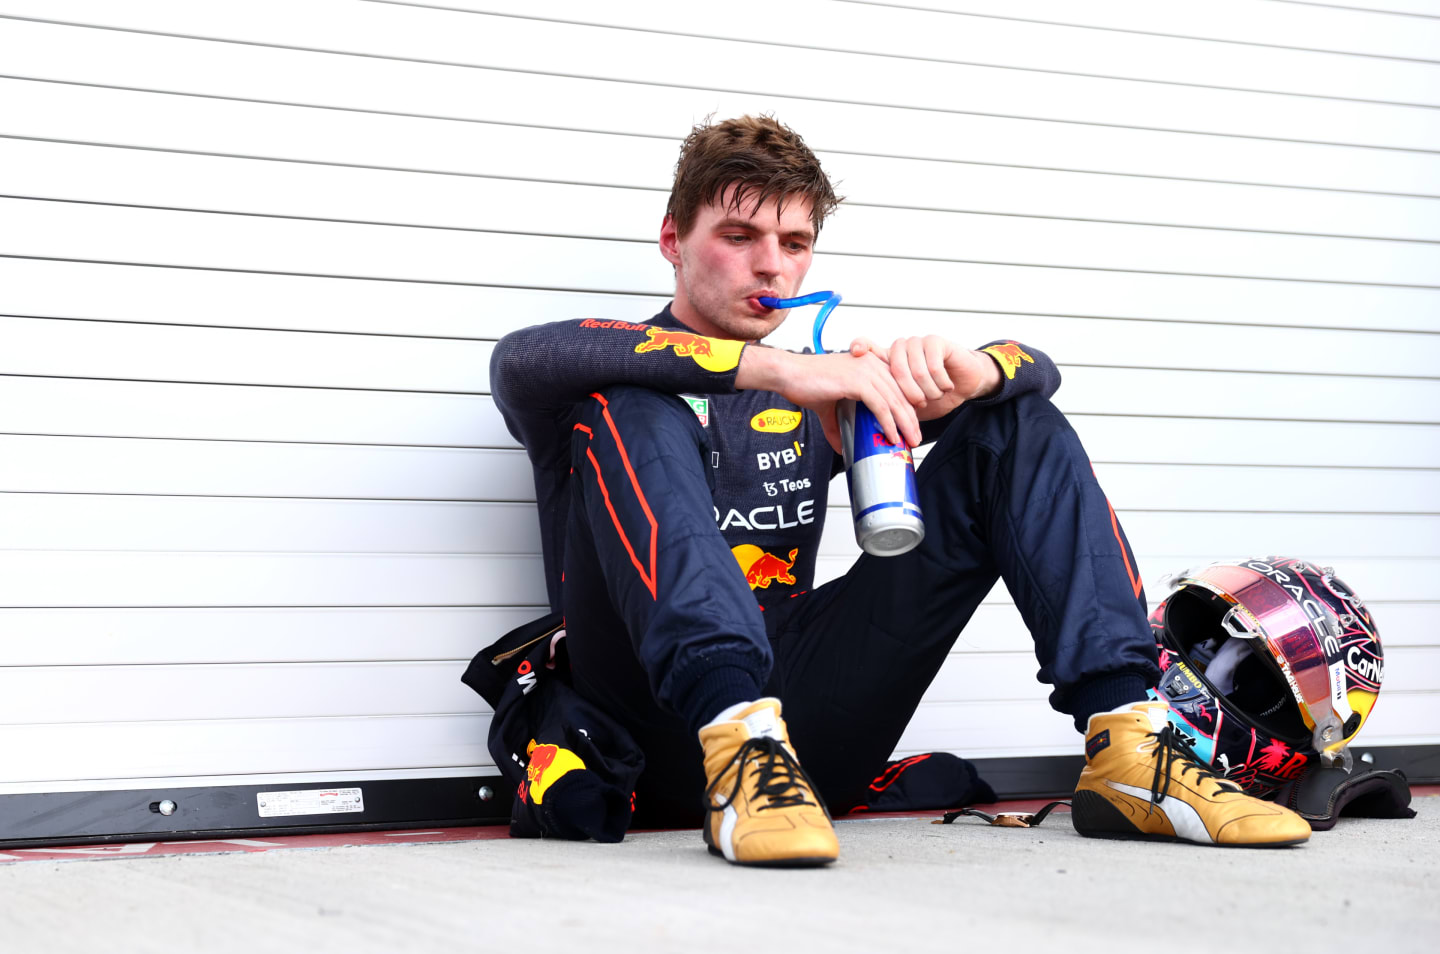 MIAMI, FLORIDA - MAY 08: Race winner Max Verstappen of the Netherlands and Oracle Red Bull Racing takes a drink in parc ferme during the F1 Grand Prix of Miami at the Miami International Autodrome on May 08, 2022 in Miami, Florida. (Photo by Dan Istitene - Formula 1/Formula 1 via Getty Images)